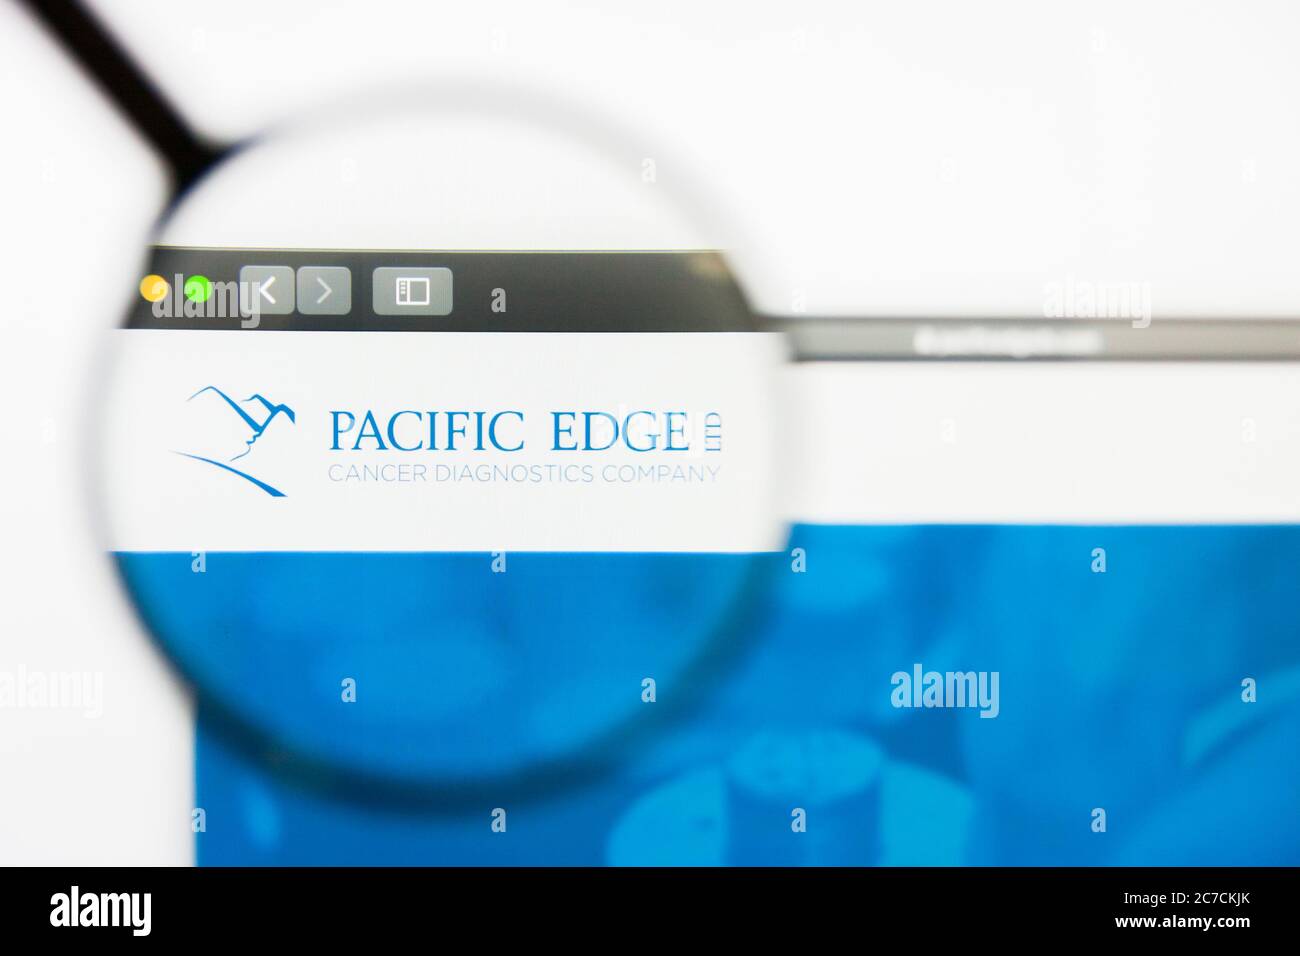 San Francisco, California, USA - 29 March 2019: Illustrative Editorial of Pacific Edge website homepage. Pacific Edge logo visible on display screen. Stock Photo